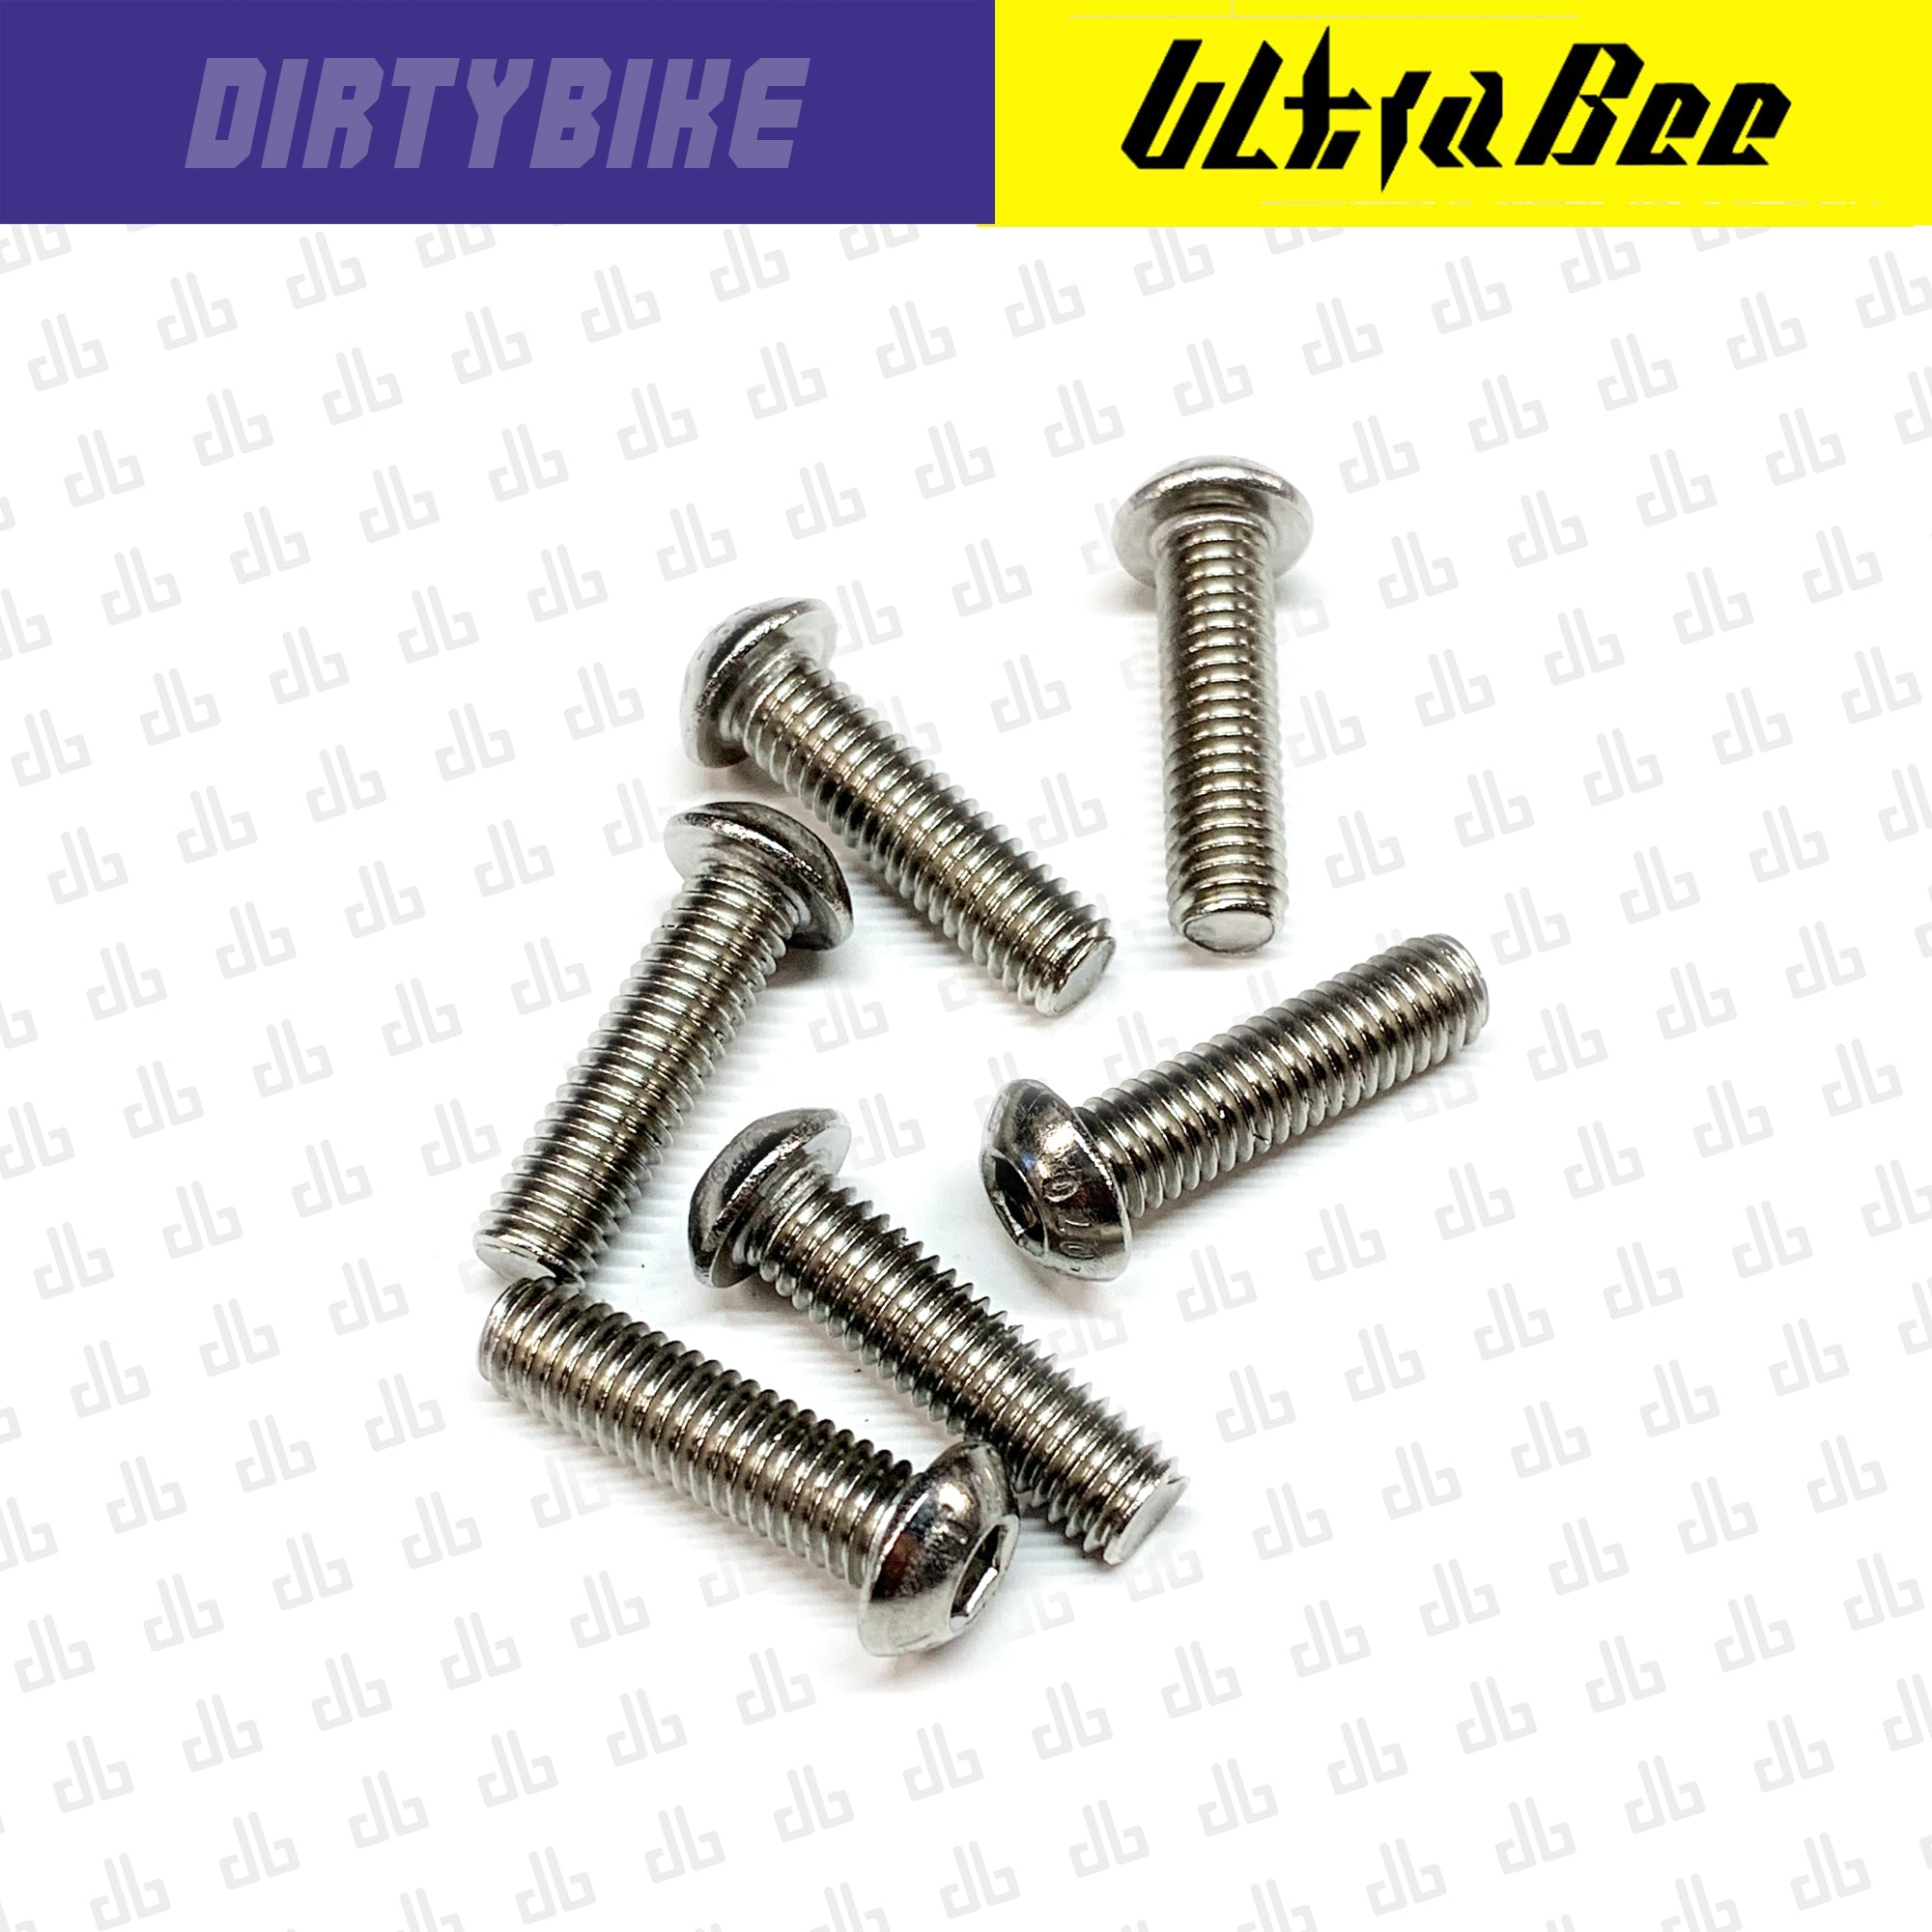 DirtyBike Stainless Steel Bolts for Final Drive Front Sprocket Surron Ultra Bee - TB Electric